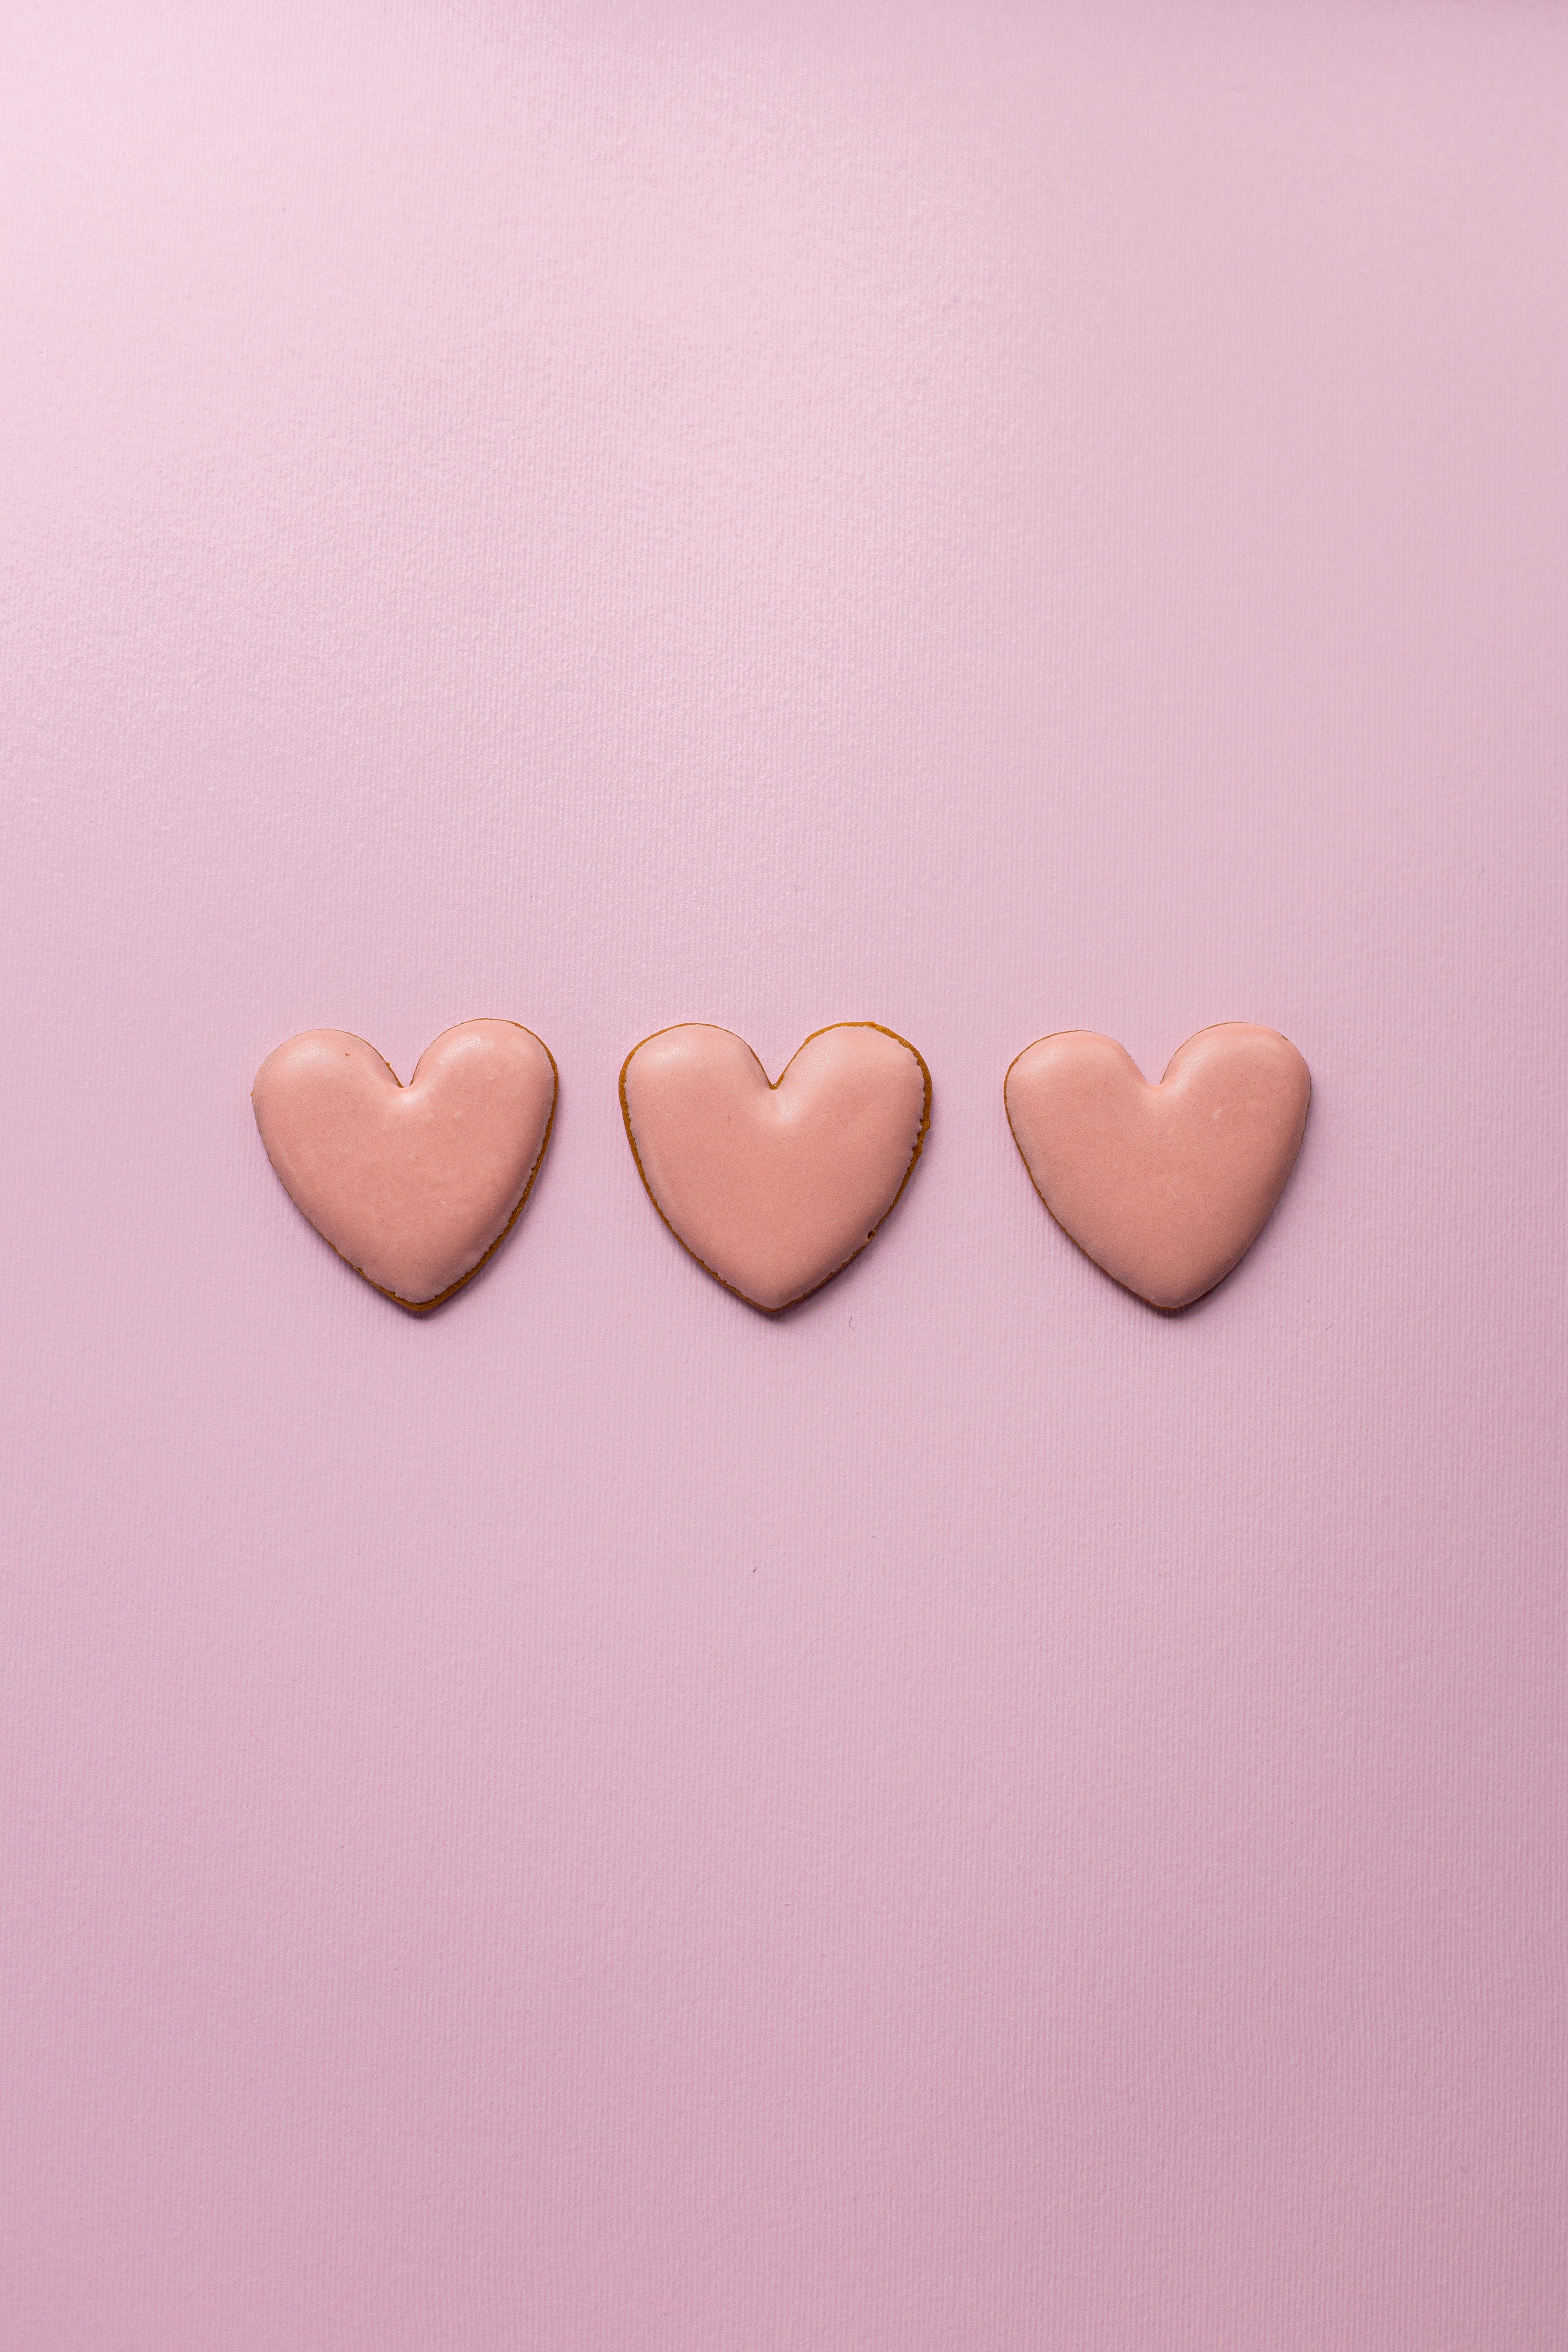 Small heart cookies on pink surface · Free